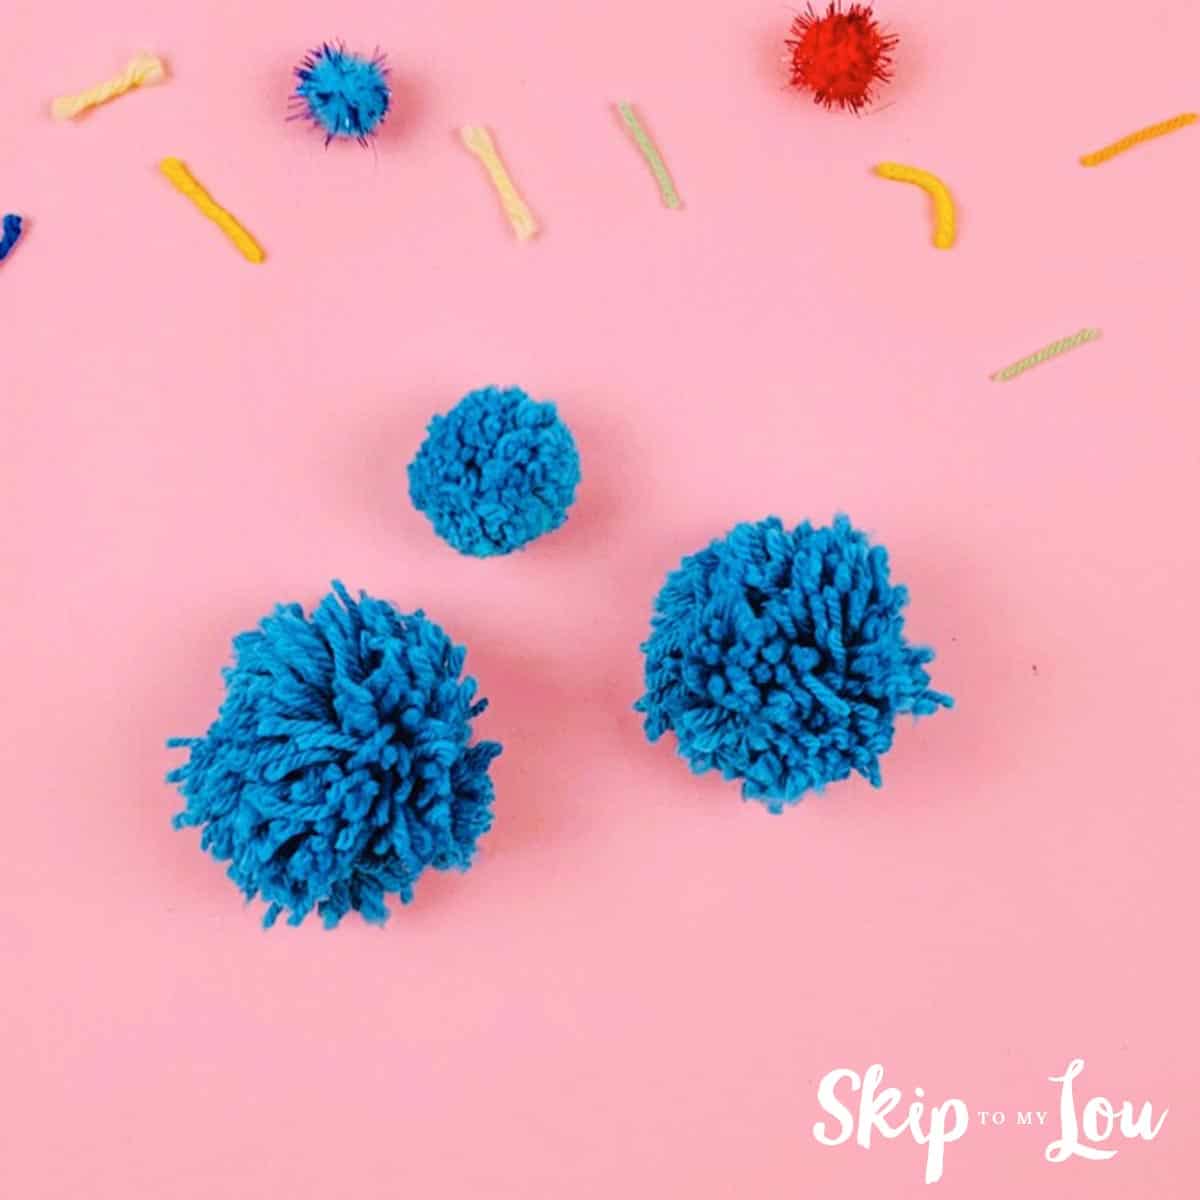 Image shows three pom poms made with blue yarn on top of a pink background, with bits of yarn around.